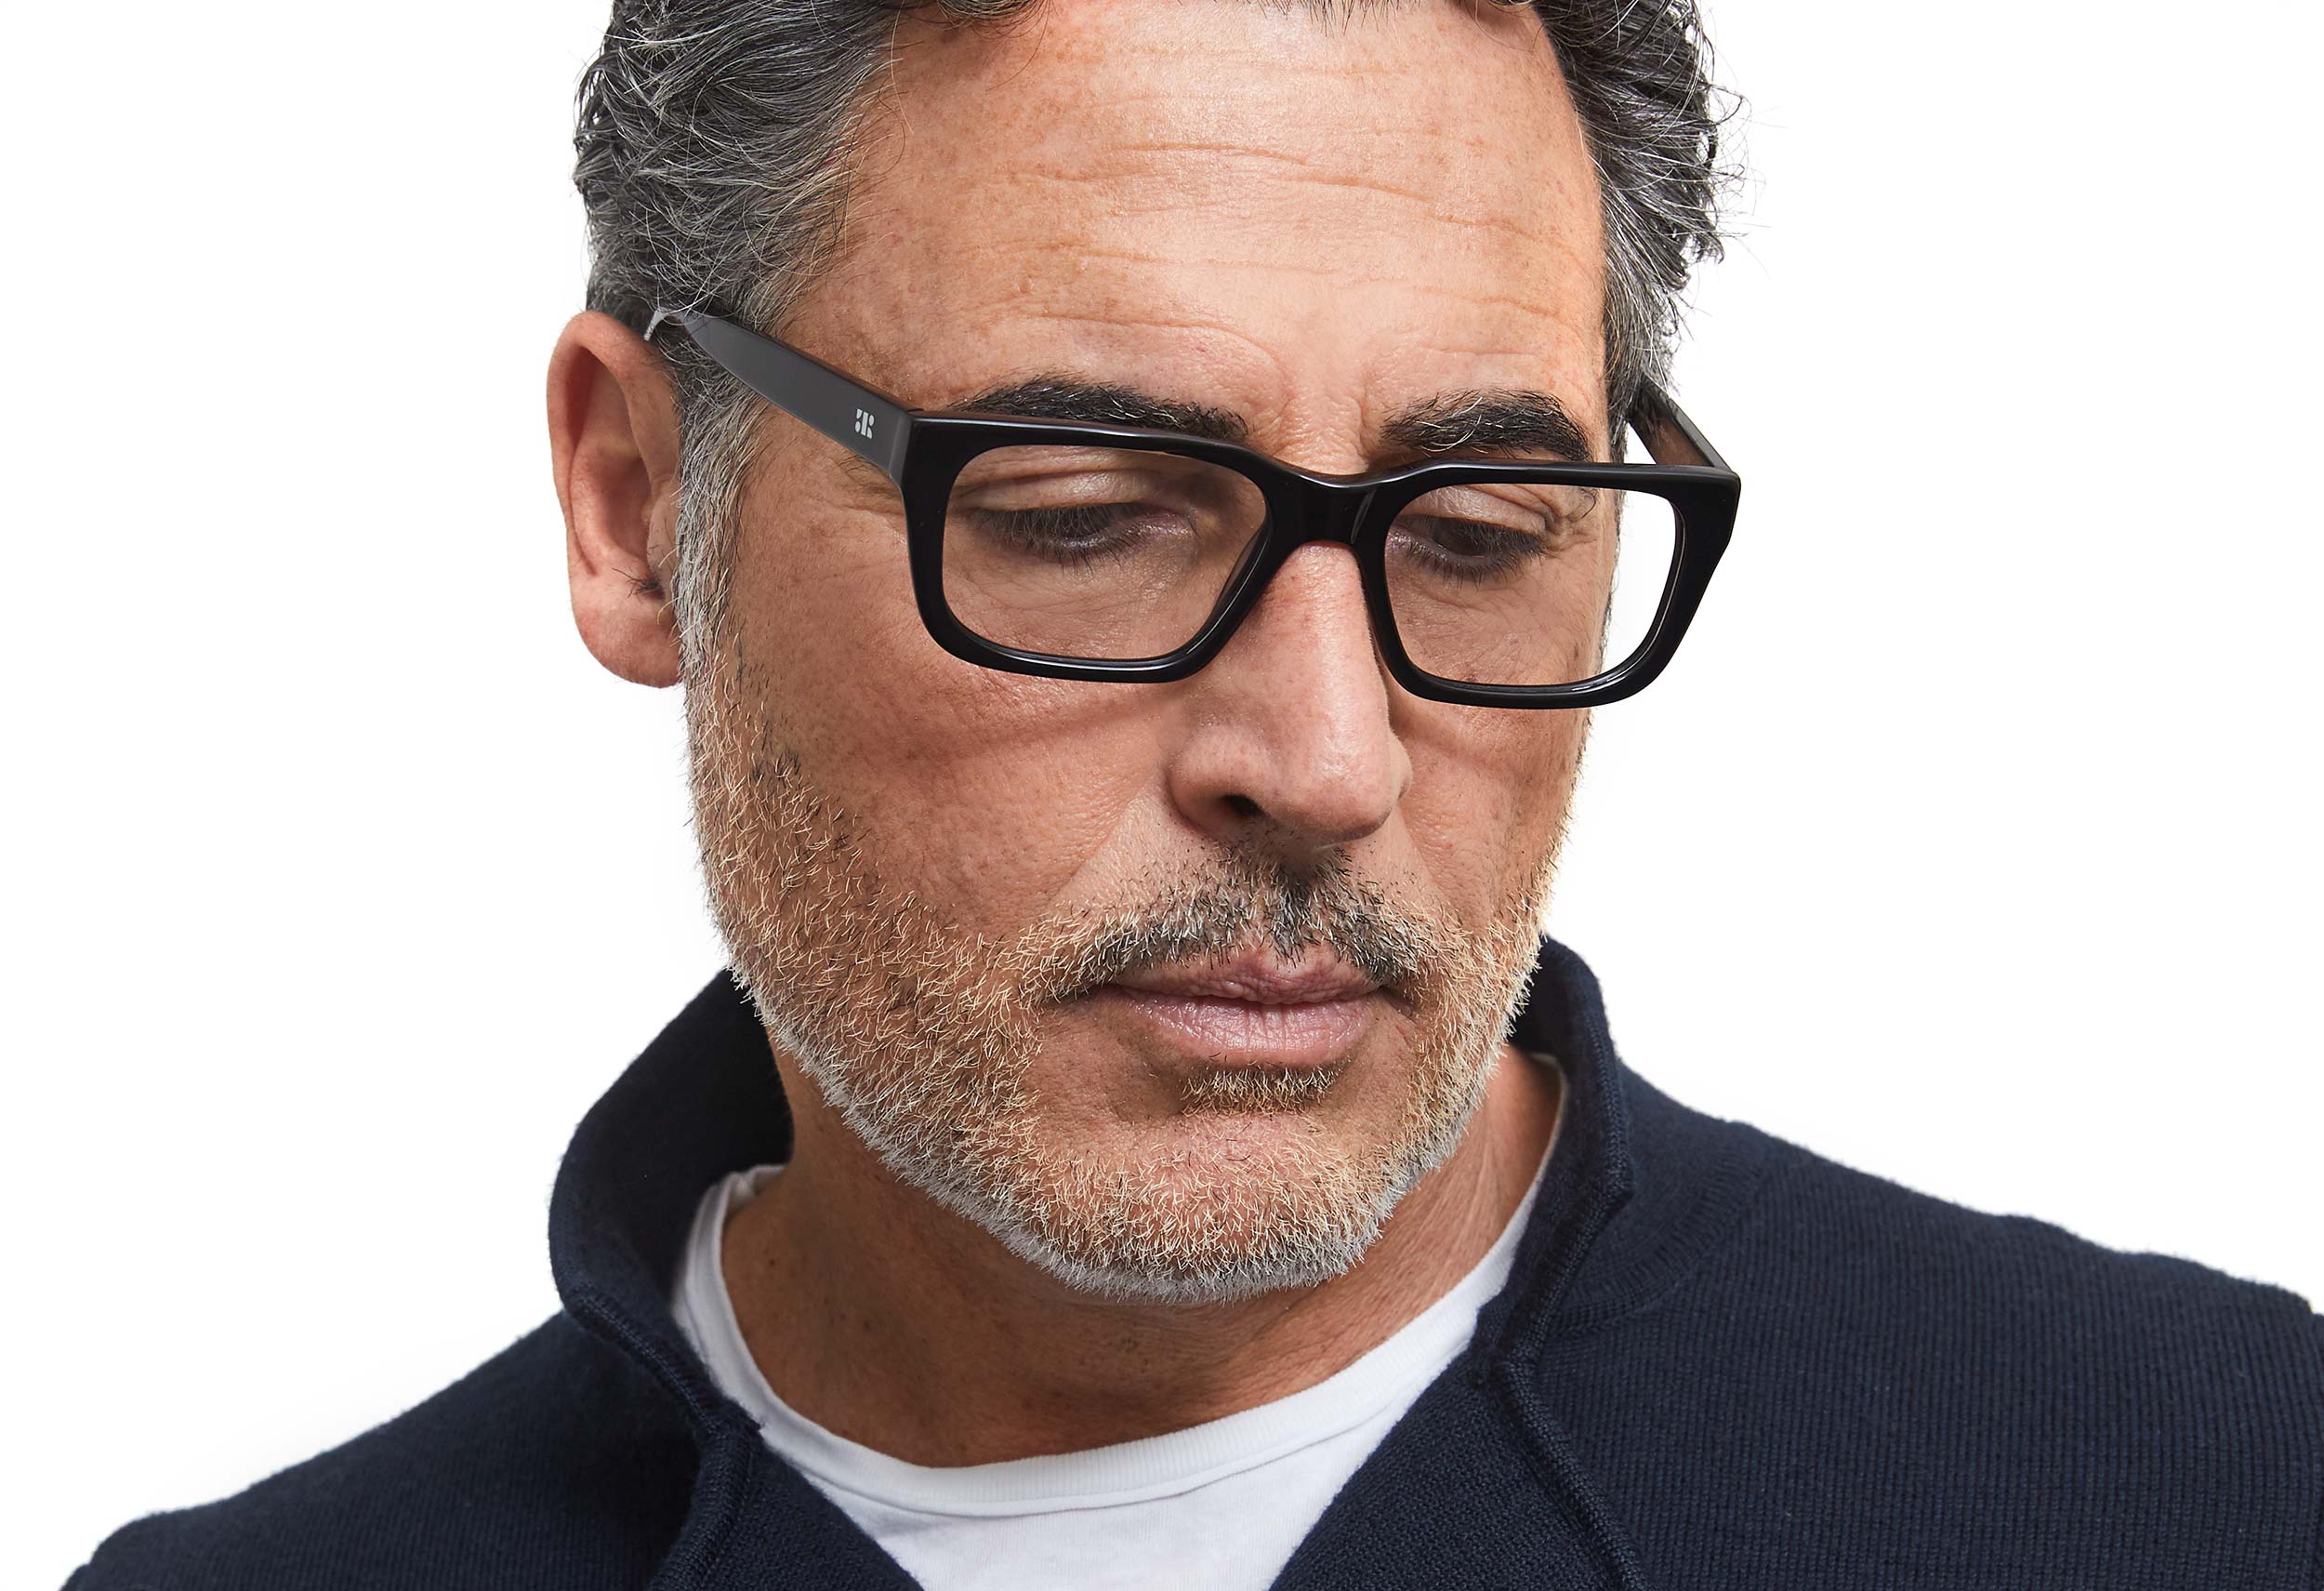 Photo of a man or woman wearing Victoire Blue Light Black & Tortoise Blue Light Glasses by French Kiwis